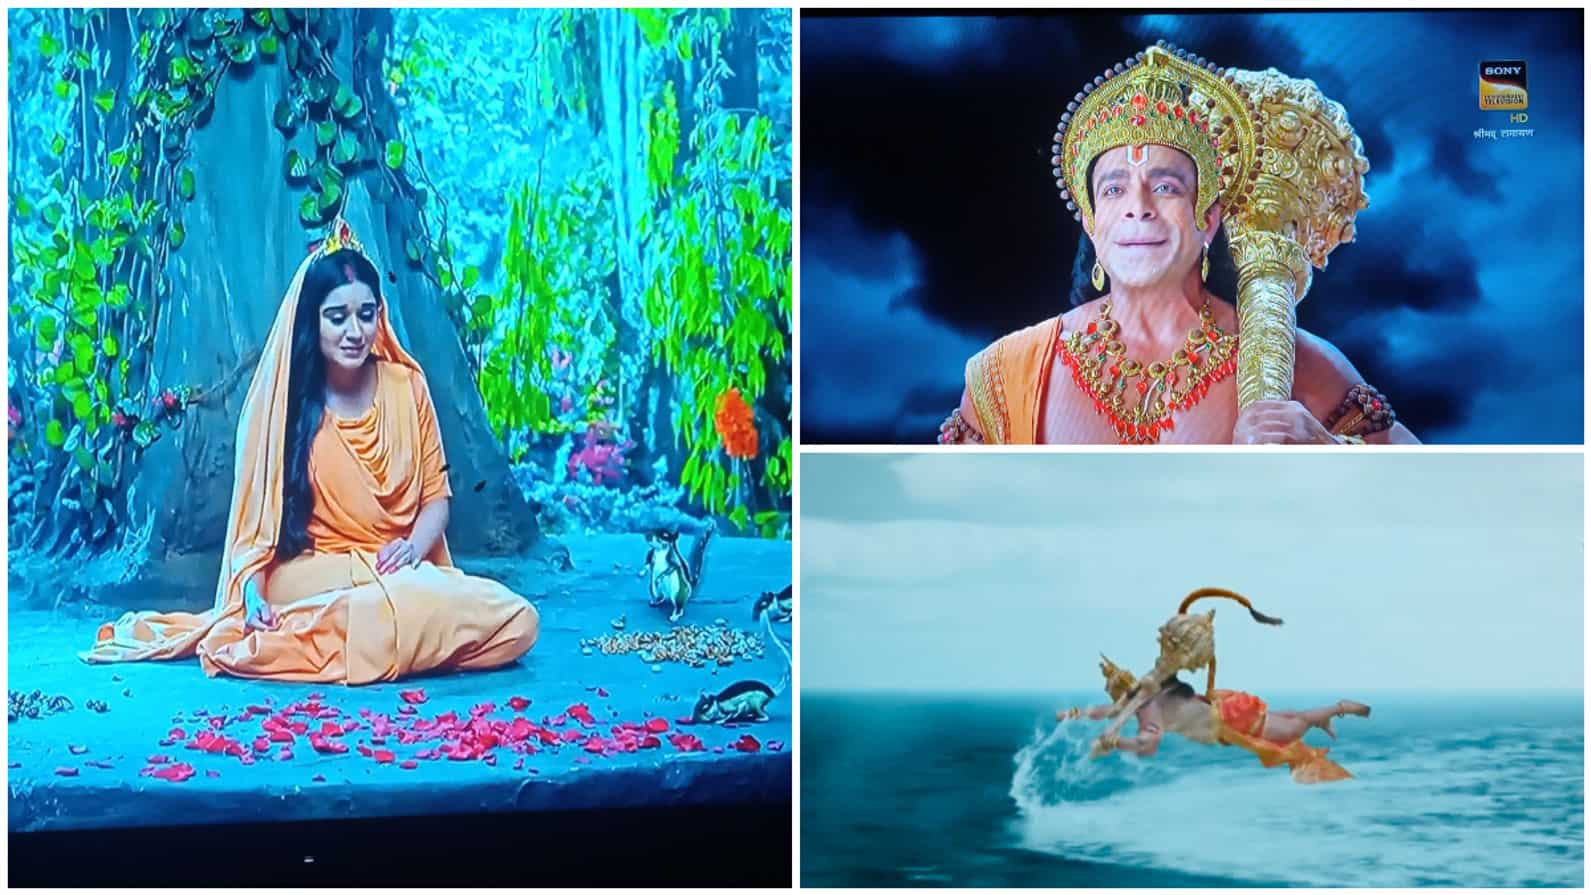 https://www.mobilemasala.com/movies/Shrimad-Ramayana-Lord-Hanuman-was-overwhelmed-by-challenge-by-Surasa-ready-to-battle-against-Sinhika-i259491